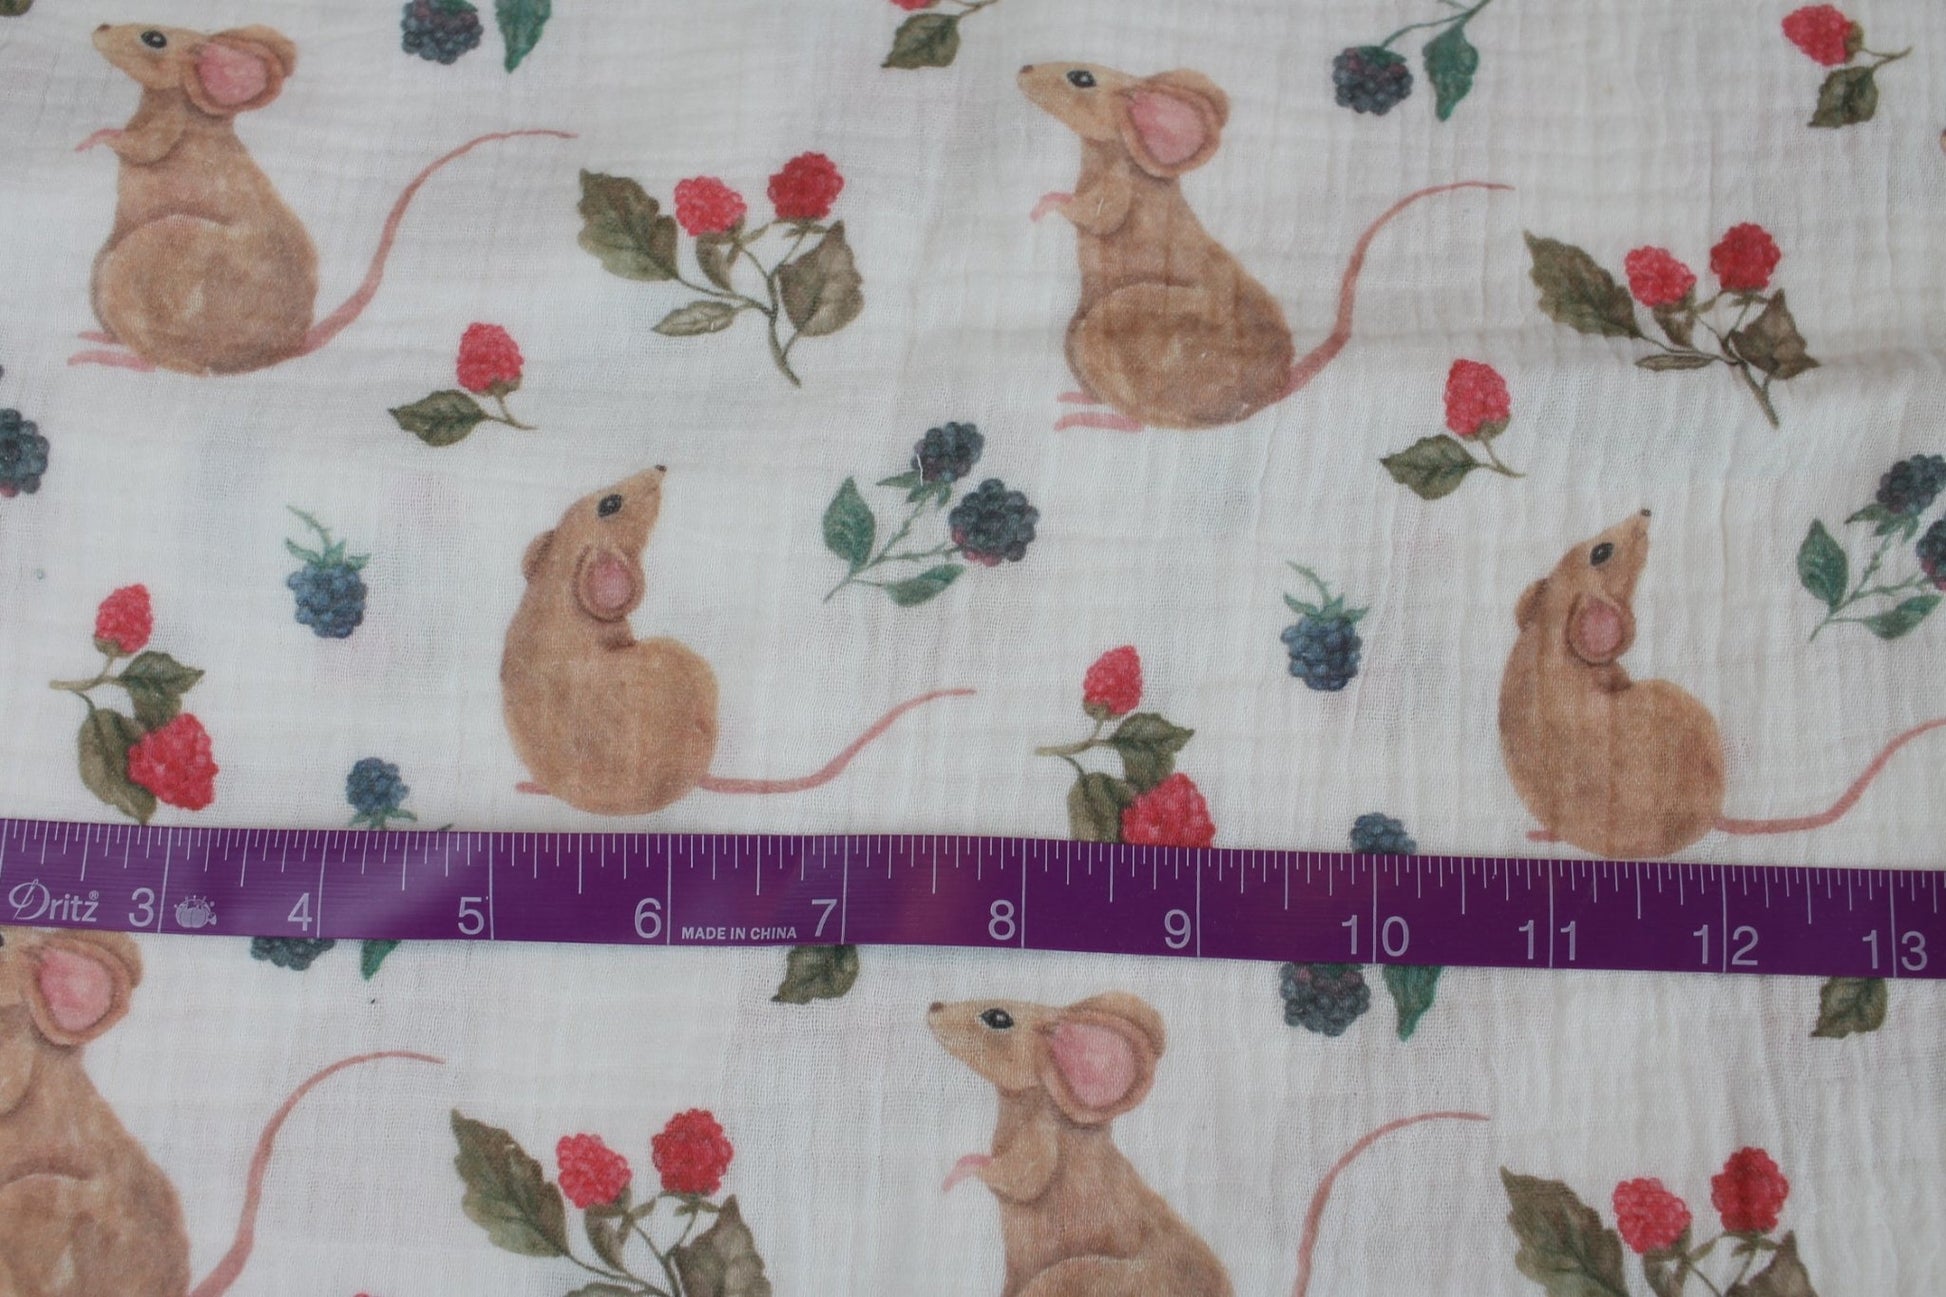 Mouse & Raspberry - Little Rhody Sewing Co.